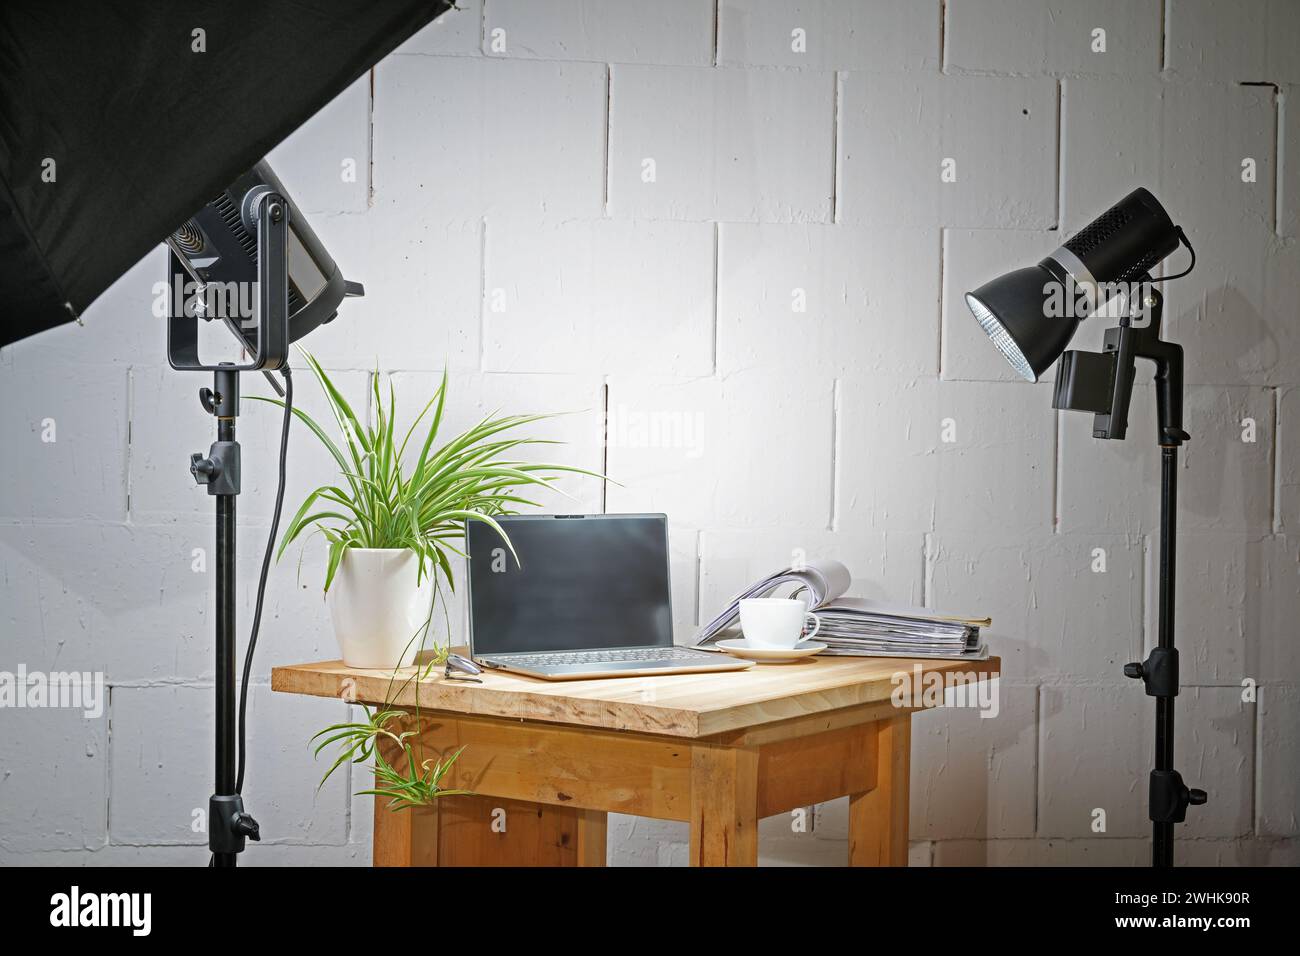 Small table top photo studio in a garage with a wooden board for the objects, lights and stands, concept for creative business a Stock Photo